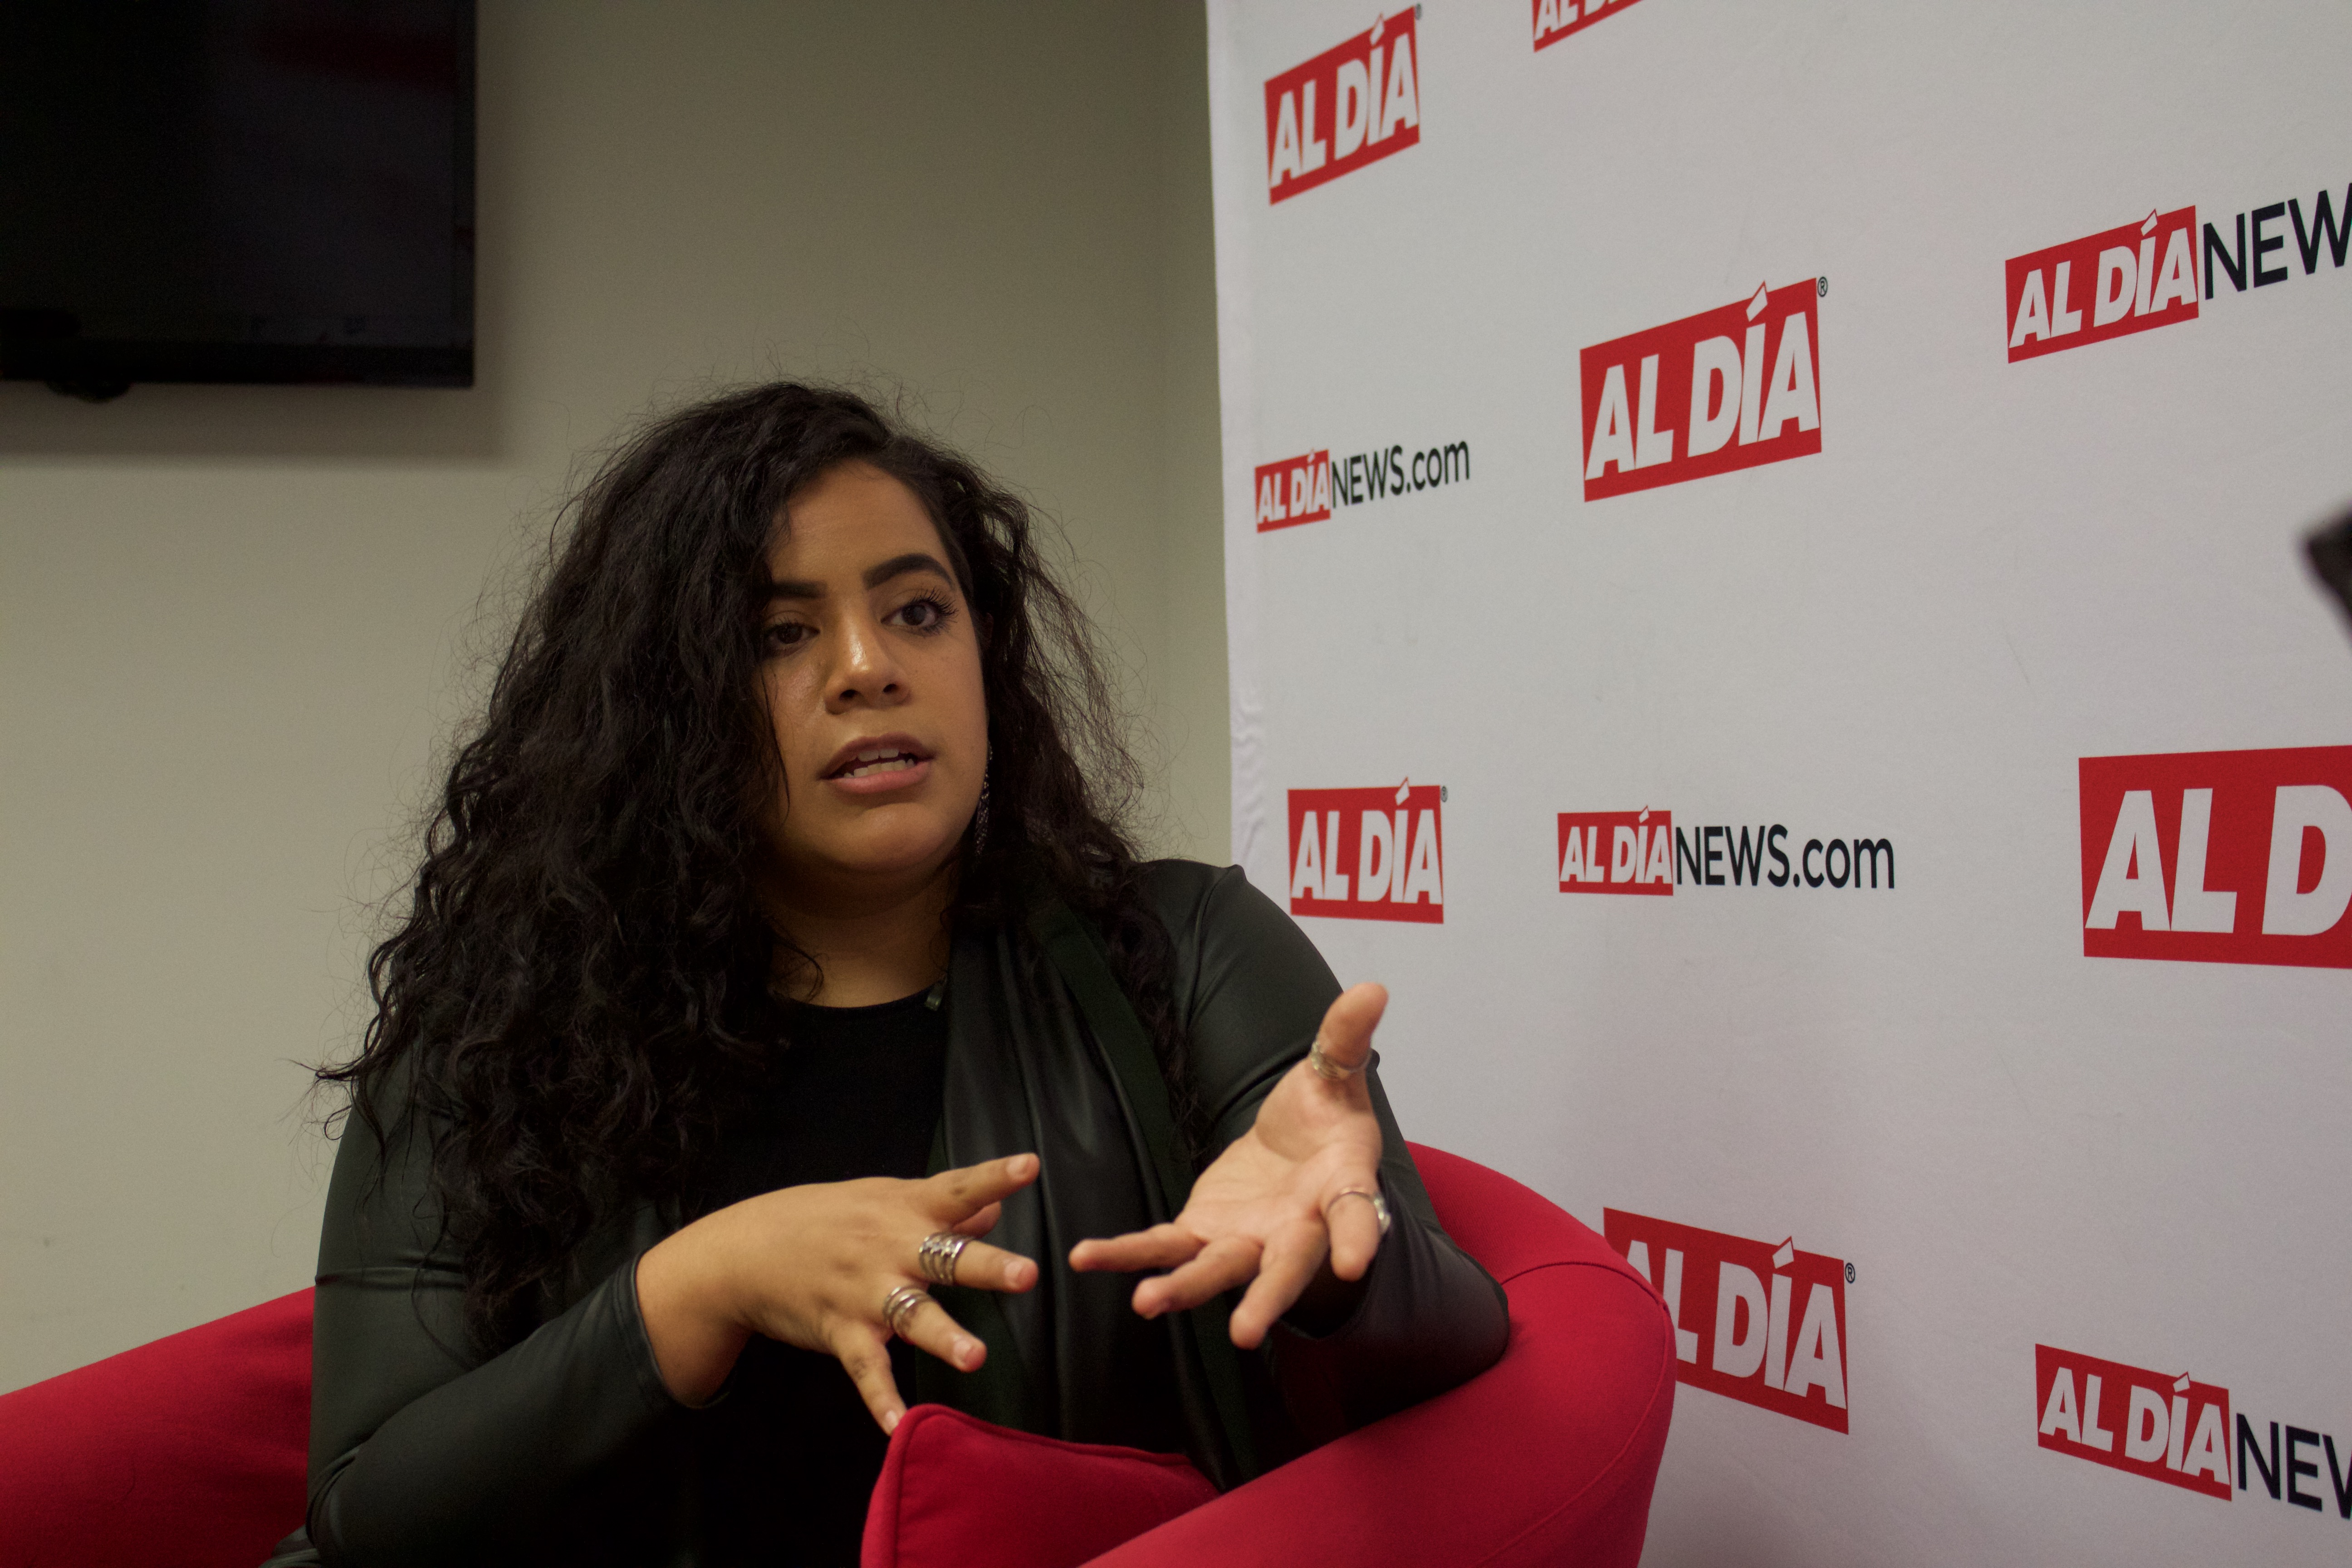 Delilah Dee, founder and CEO of Delilah & Company, a digital content and events agency, aimed to promote positive content. Photo: Yesid Vargas/AL DÍA News